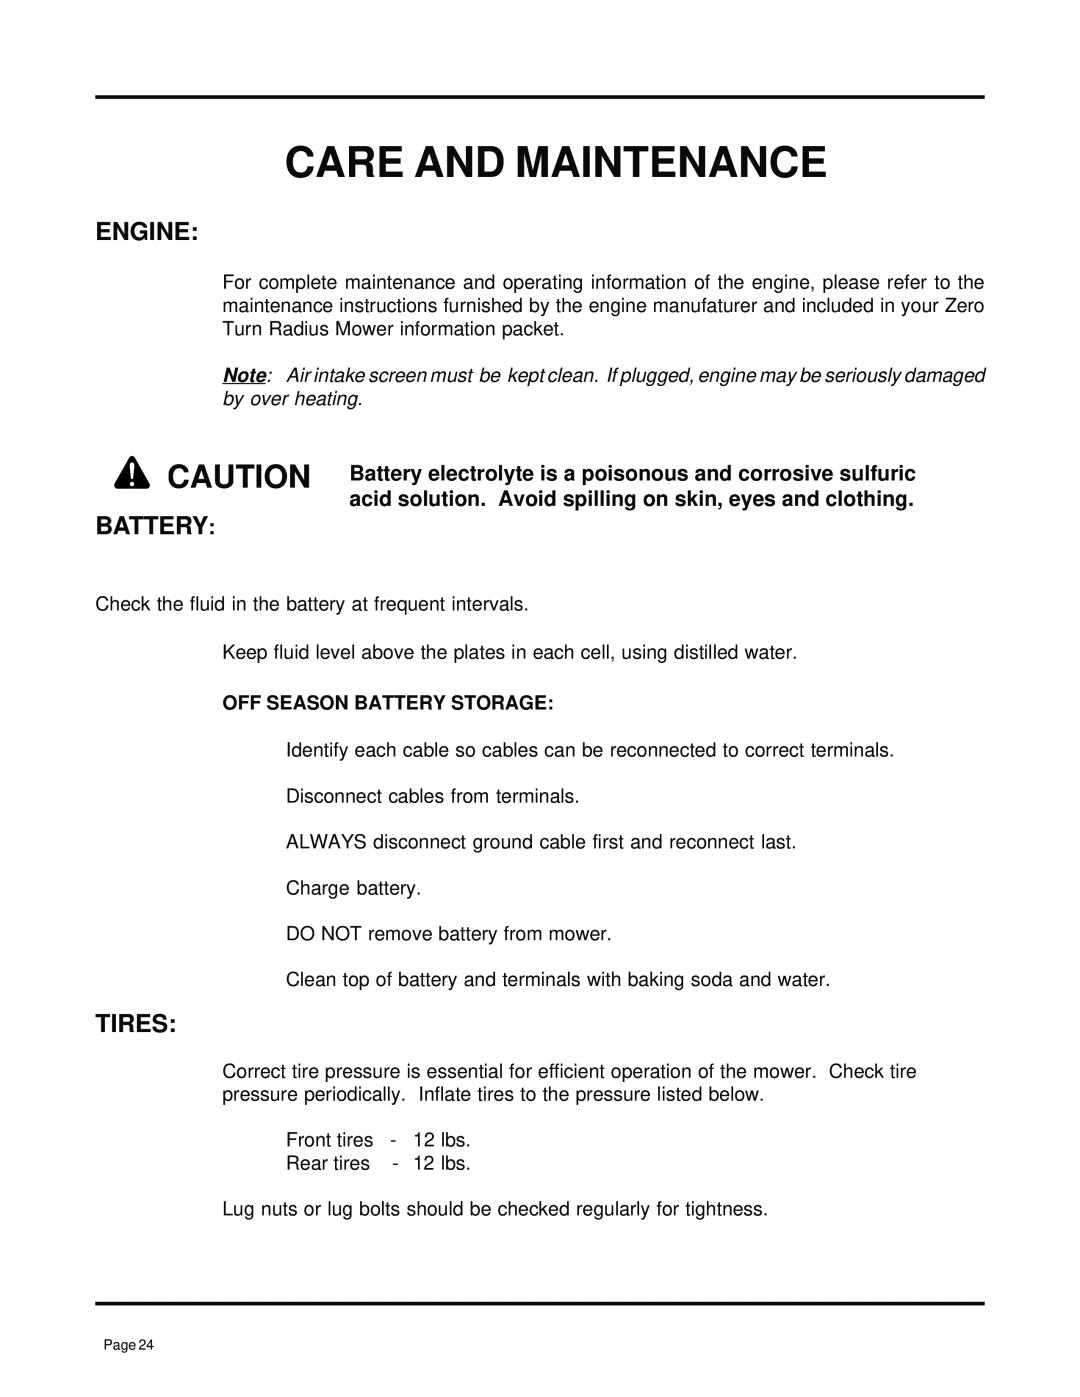 Dixon ZTR 7025 manual Care And Maintenance, Engine, Tires, Battery electrolyte is a poisonous and corrosive sulfuric 